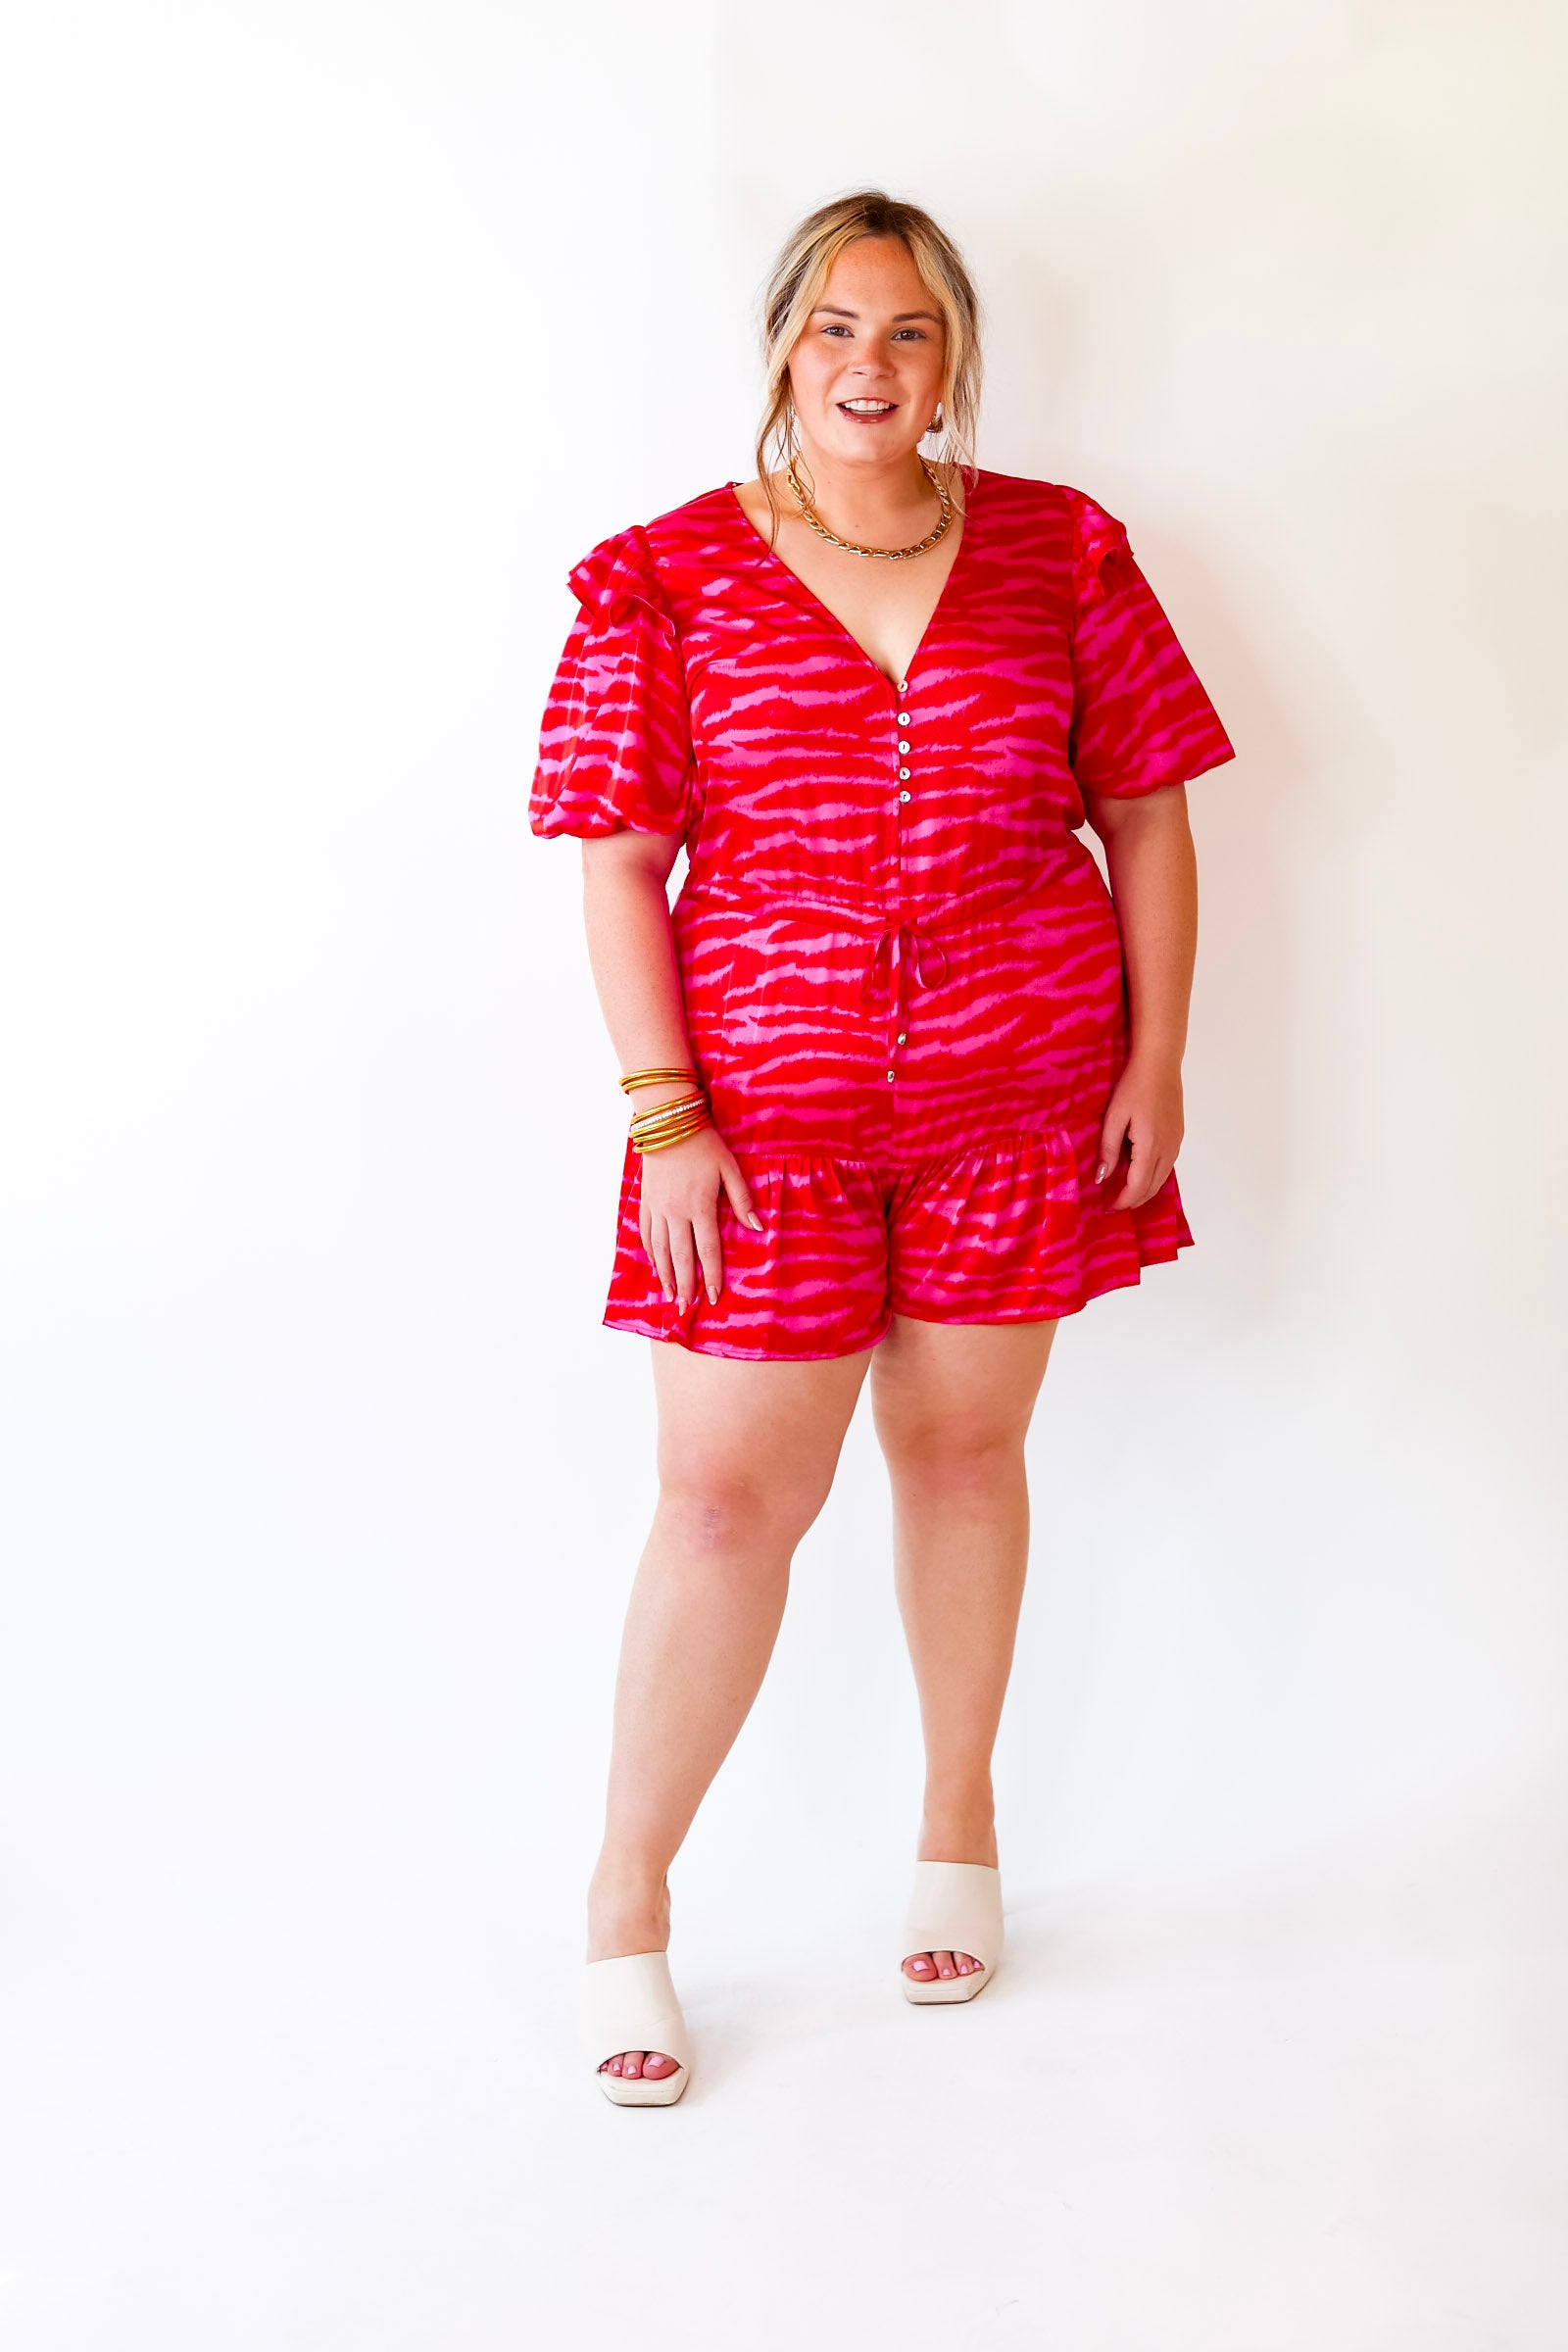 Head Turner Animal Print Romper in Pink and Red - Giddy Up Glamour Boutique